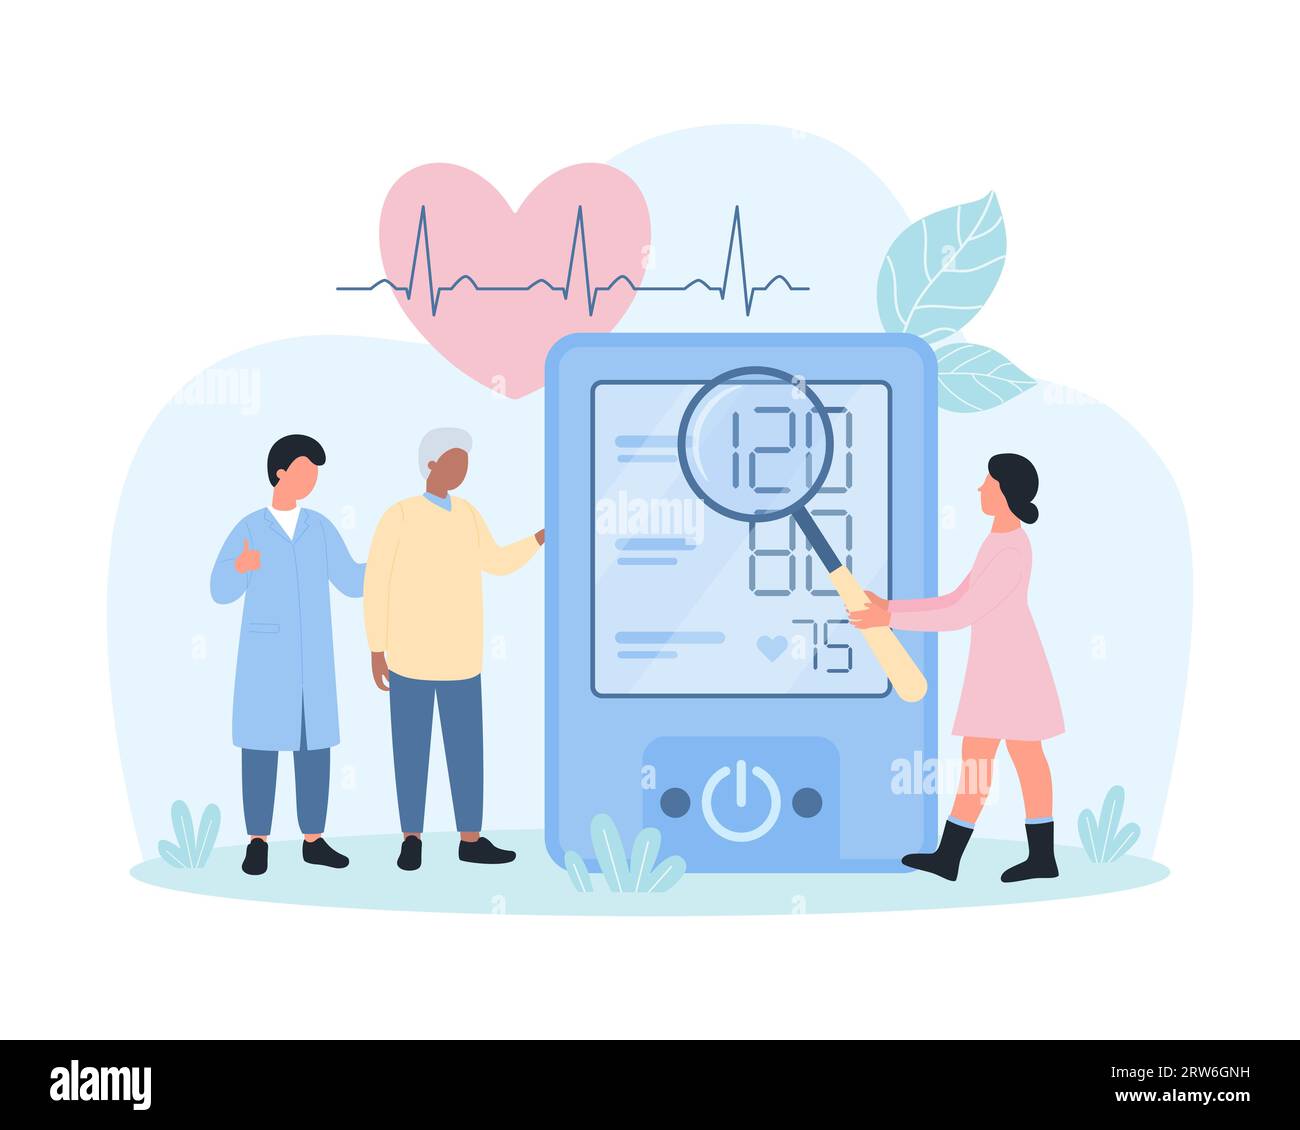 Arterial hypertension, cardiovascular system checkup vector illustration. Cartoon tiny doctors measuring blood pressure of patient using electronic device, people check readings with magnifying glass Stock Vector